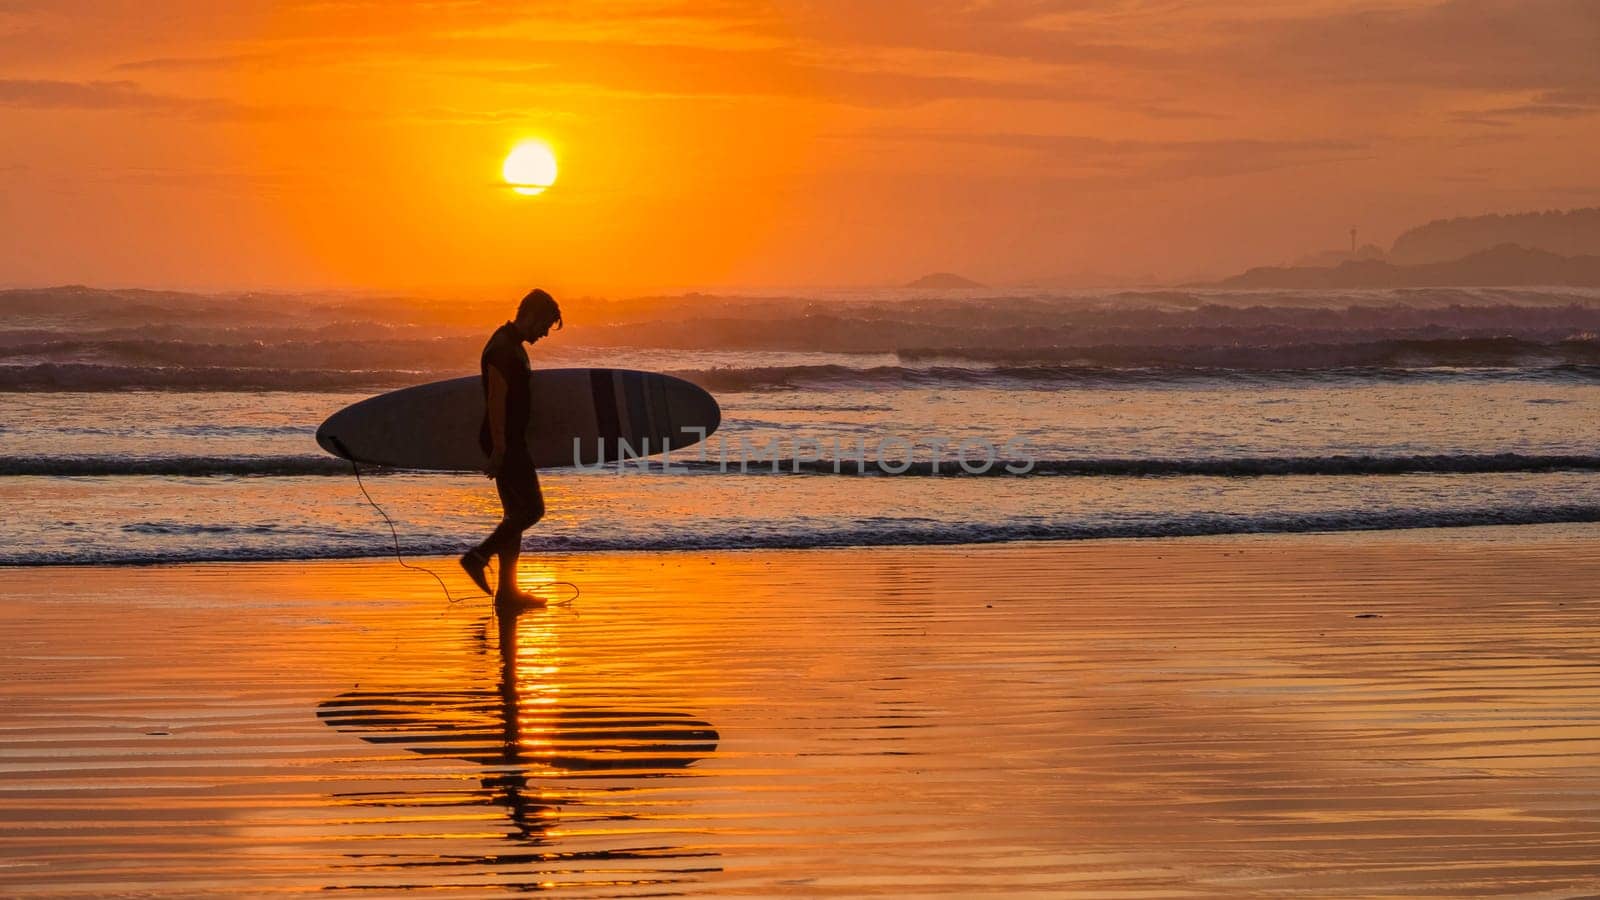 Tofino Beach Vancouver Island Pacific rim coast during sunset, surfers with surfboard during sunset at the beach of Tofino, surfers silhouette Canada Vancouver Island Tofino Long beach